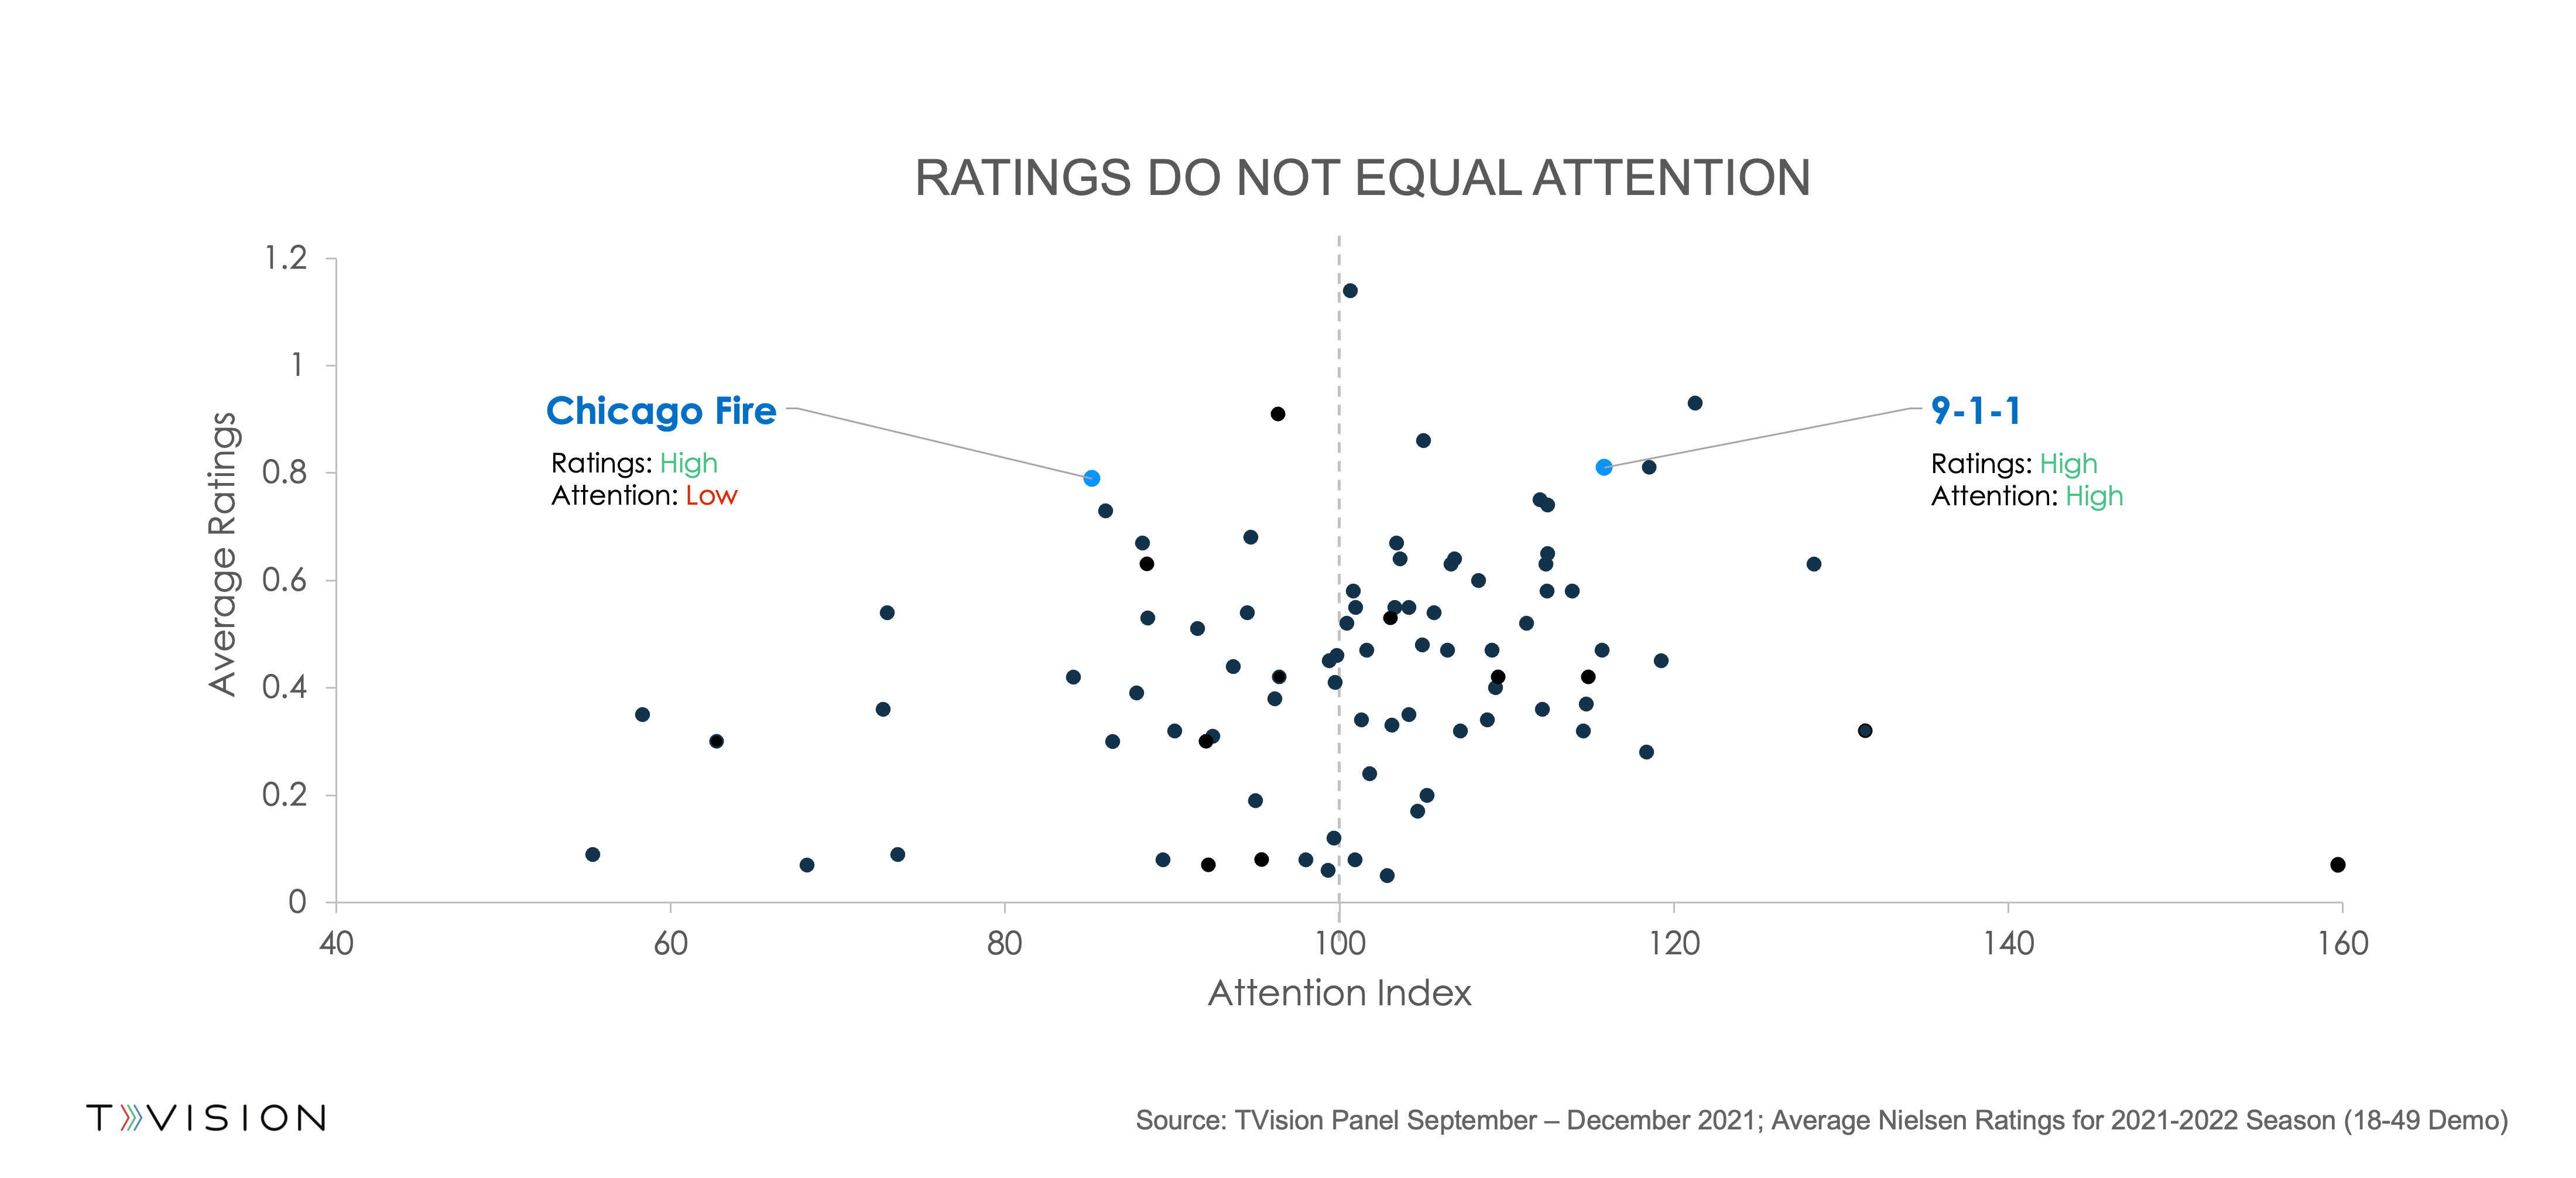 Rating vs. Attention